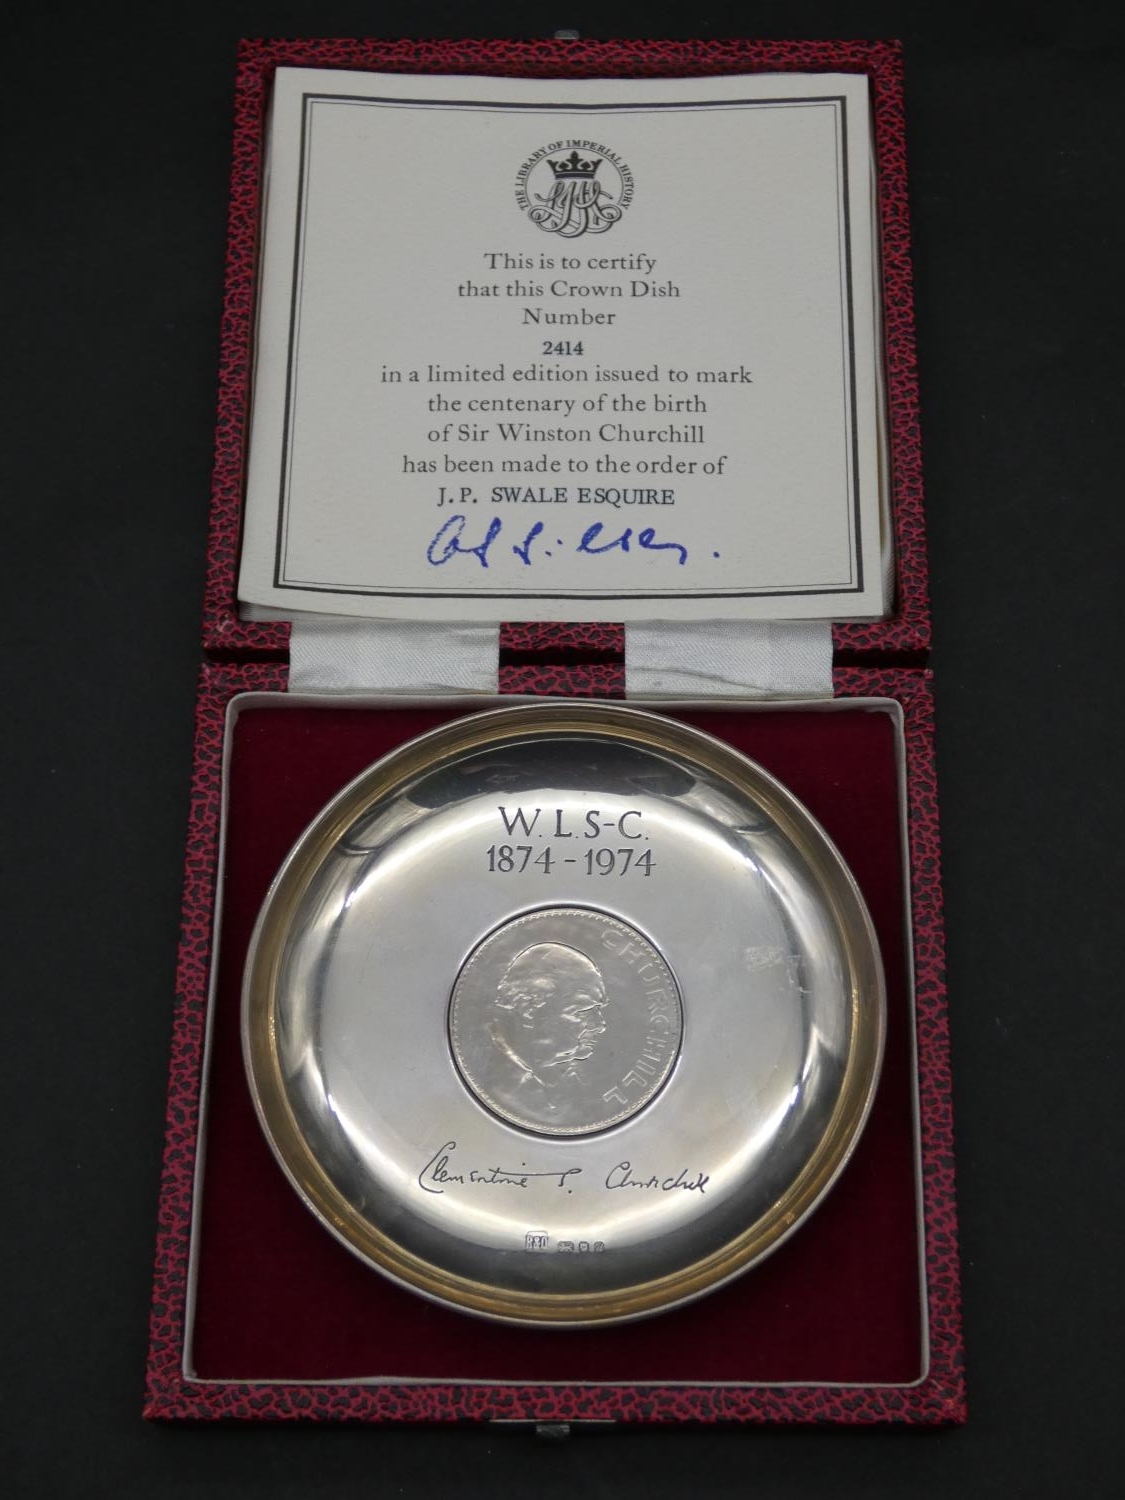 A red leather effect cased silver Winston Churchill centenary dish. With signature of Clementine